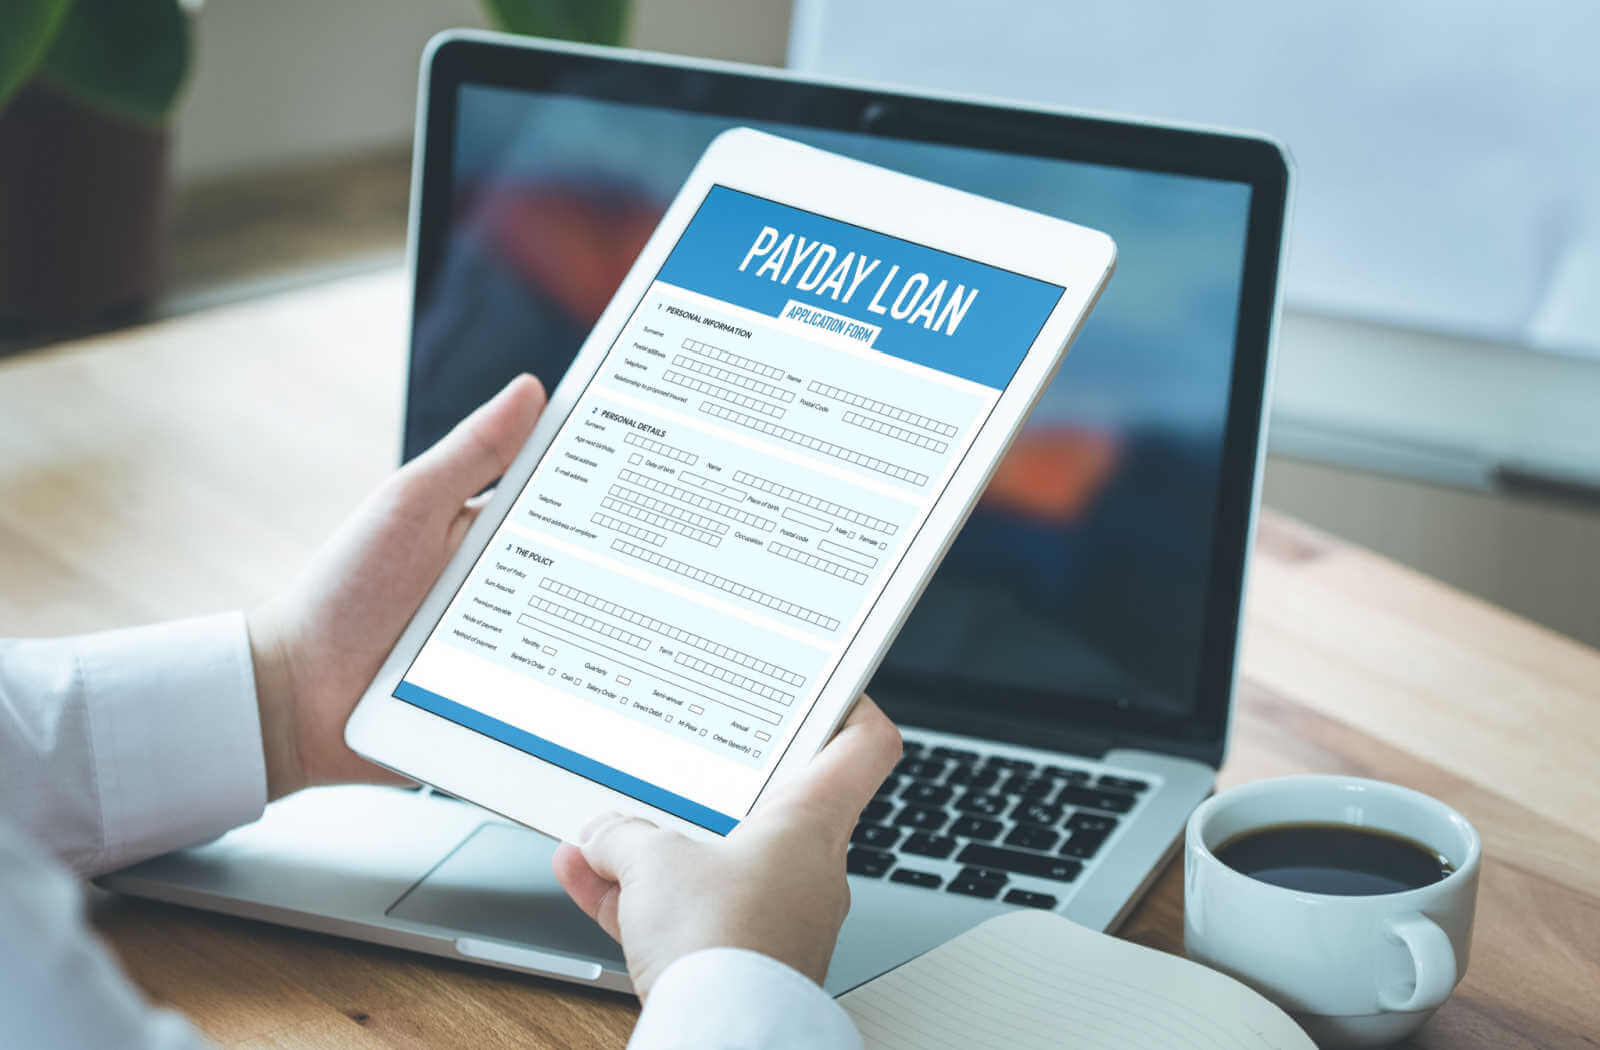 Payday loan application on tablet that person is holding